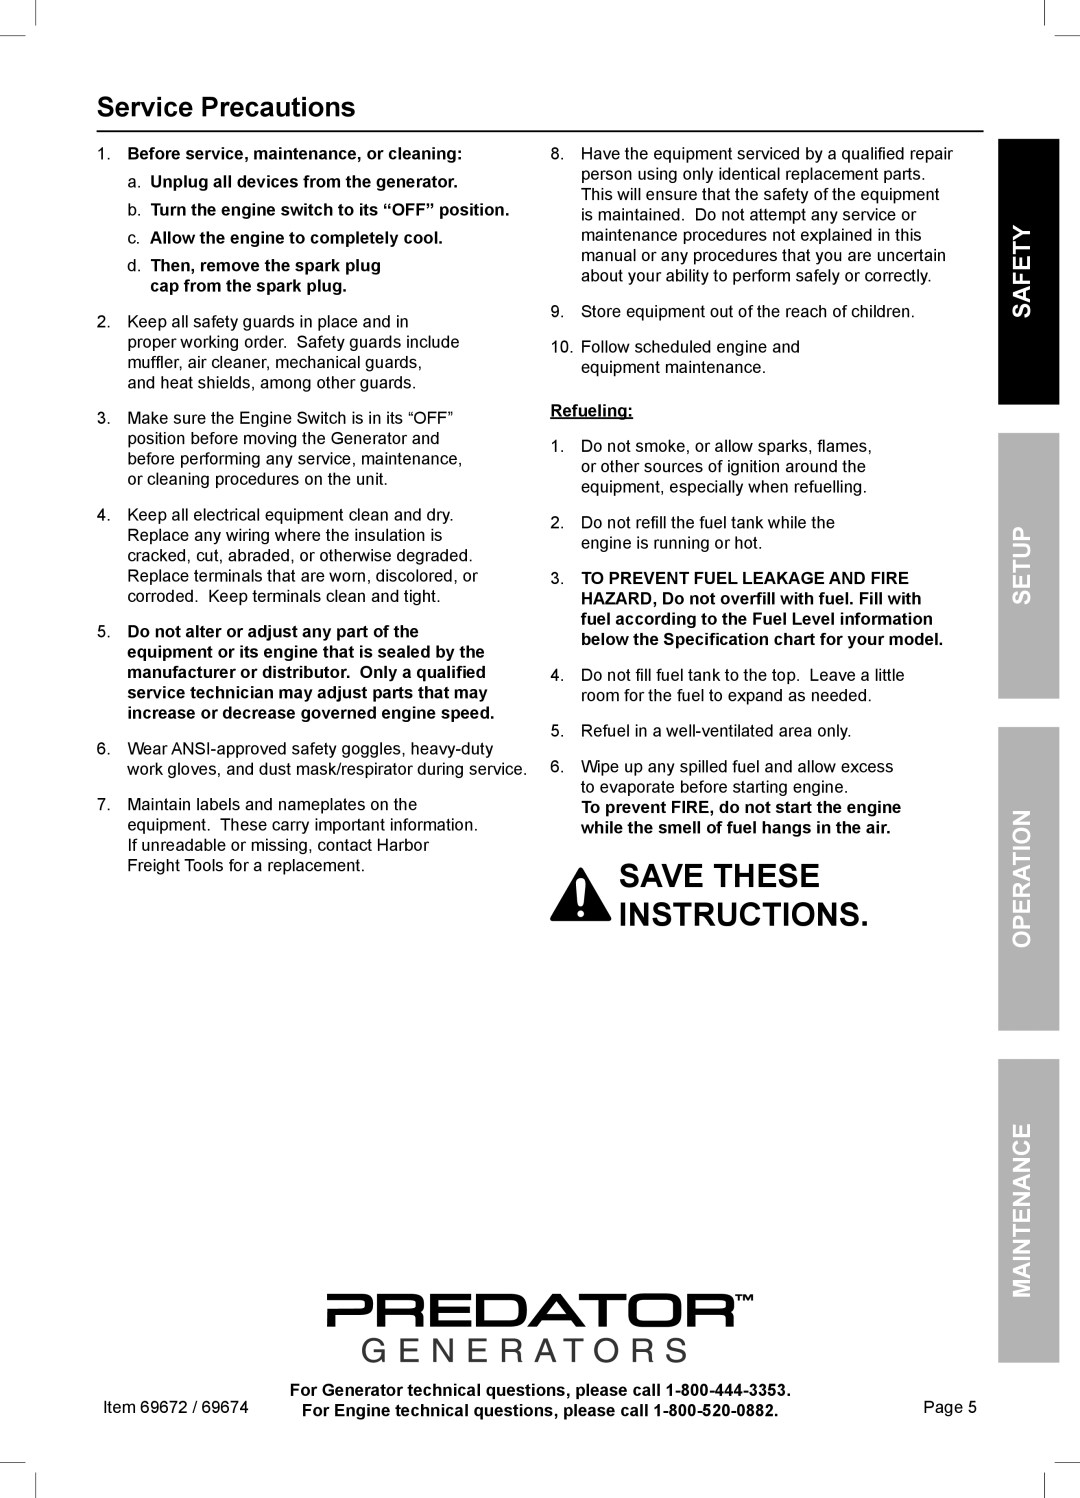 Harbor Freight Tools 69672 manual Service Precautions, Before service, maintenance, or cleaning, Refueling, Safety, Page 